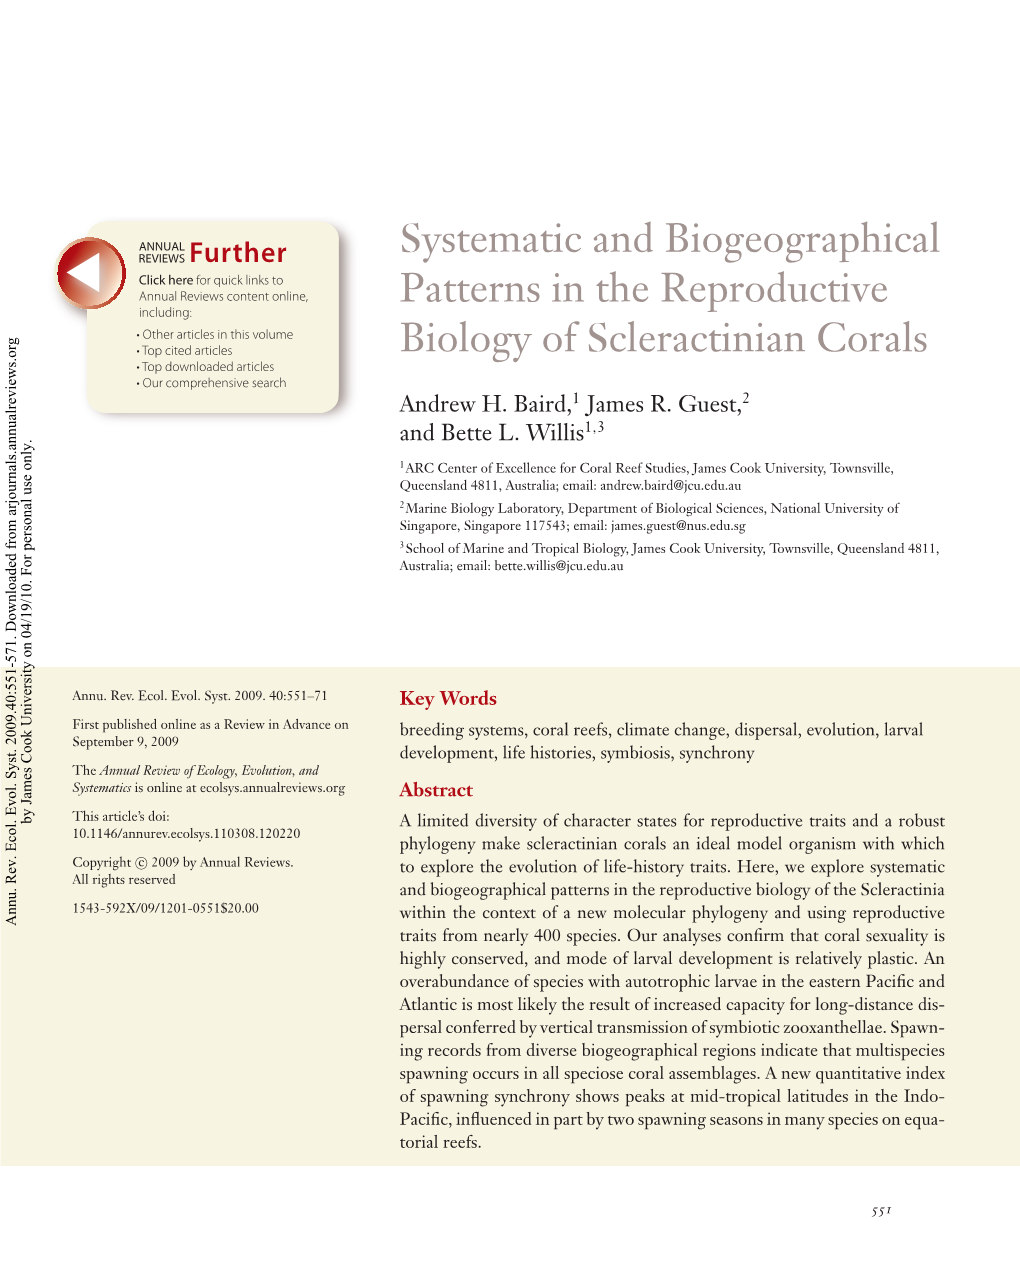 Systematic and Biogeographical Patterns in the Reproductive Biology of Scleractinian Corals